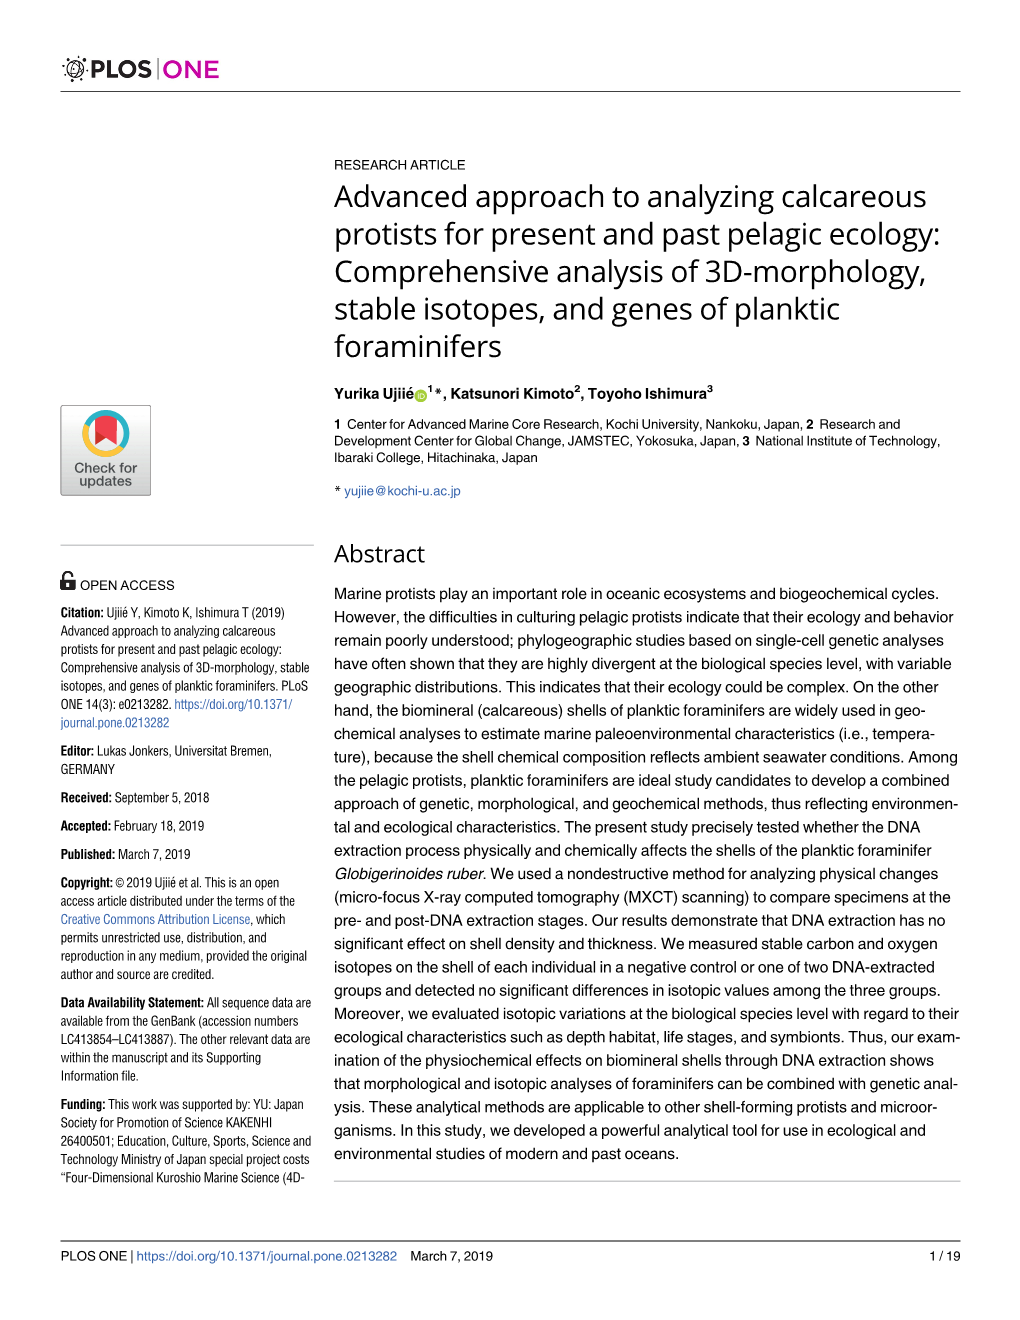 Advanced Approach to Analyzing Calcareous Protists for Present And